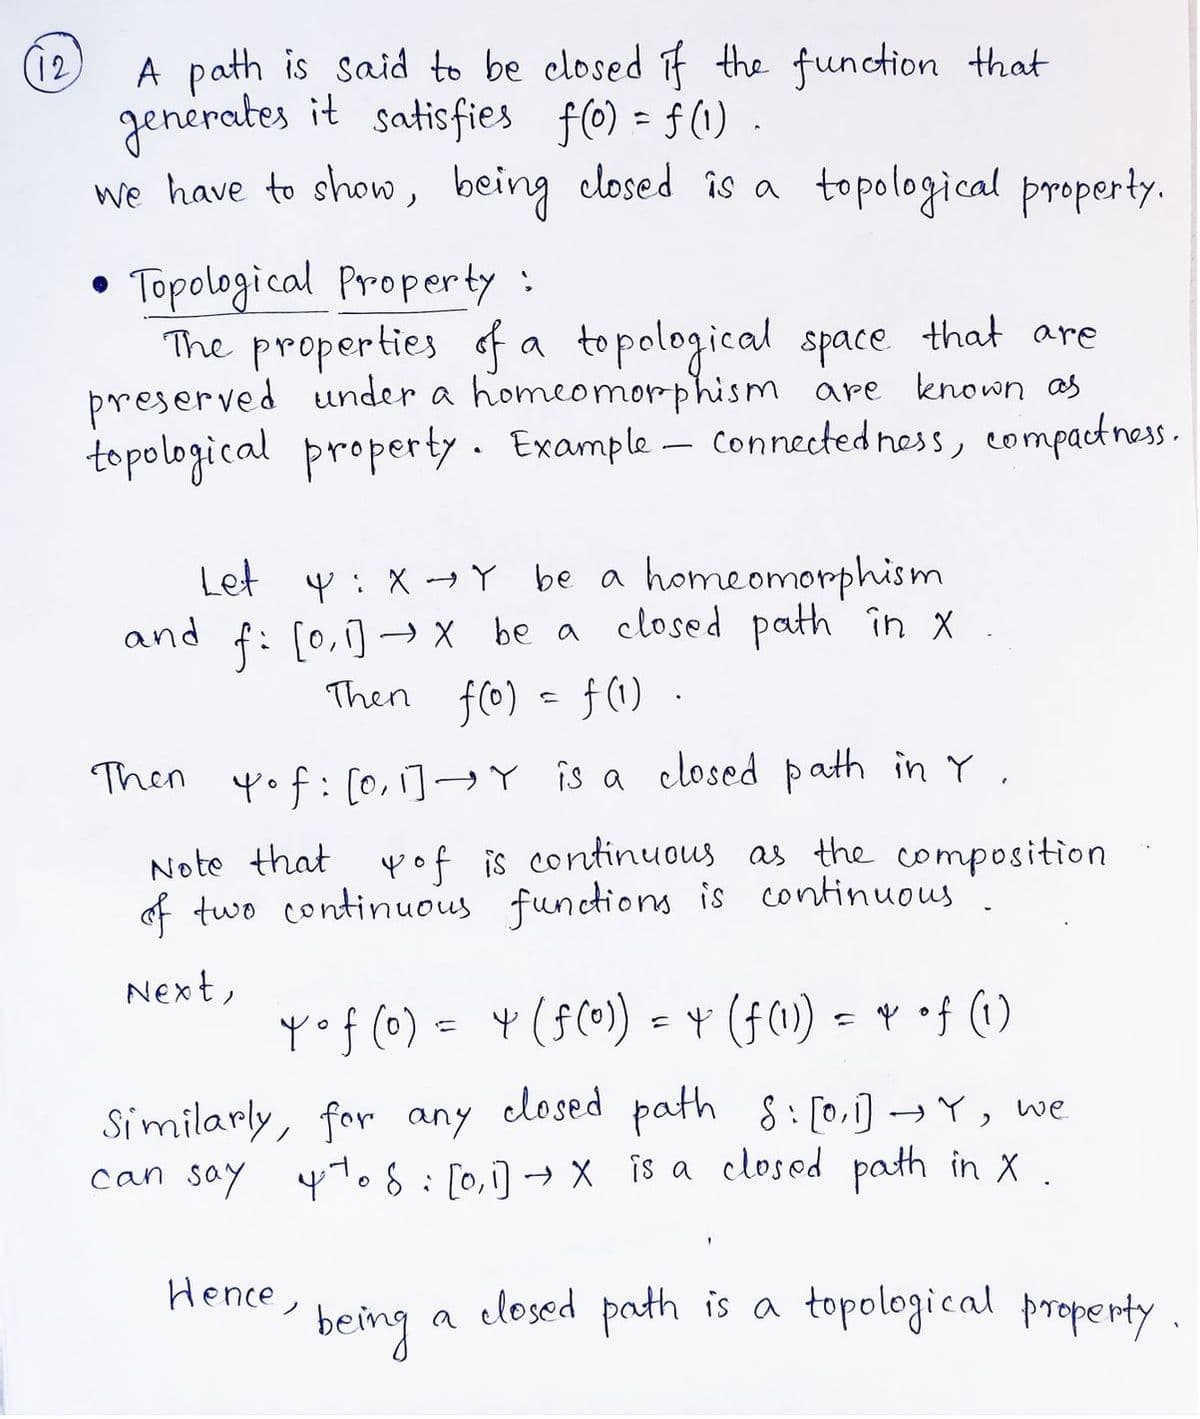 (12)
A path is said to be closed if the function that
generates it satisfies f(0) = f(1)
we have to show, being closed is a topological property.
Topological Property :
The properties of a topological space that are
preserved under a homeomorphism are known as
topological property. Example - Connectedness, compactness.
●
and
Let Y: XY be a homeomorphism
f: [0, 1] → x be a closed path in x .
Then f(0) = f(1).
Then yof: [0, 1] → Y is a closed path in Y.
Note that yof is continuous as the composition
of two continuous functions is continuous
Next,
Yof (0) = 4 (f (0)) = † (f (1)) = * of (1)
Similarly, for any closed path 8:[0,1] →Y, we
can say 4 to 8 [0,1] → X is a closed path in X.
being
closed path is a topological property
Hence